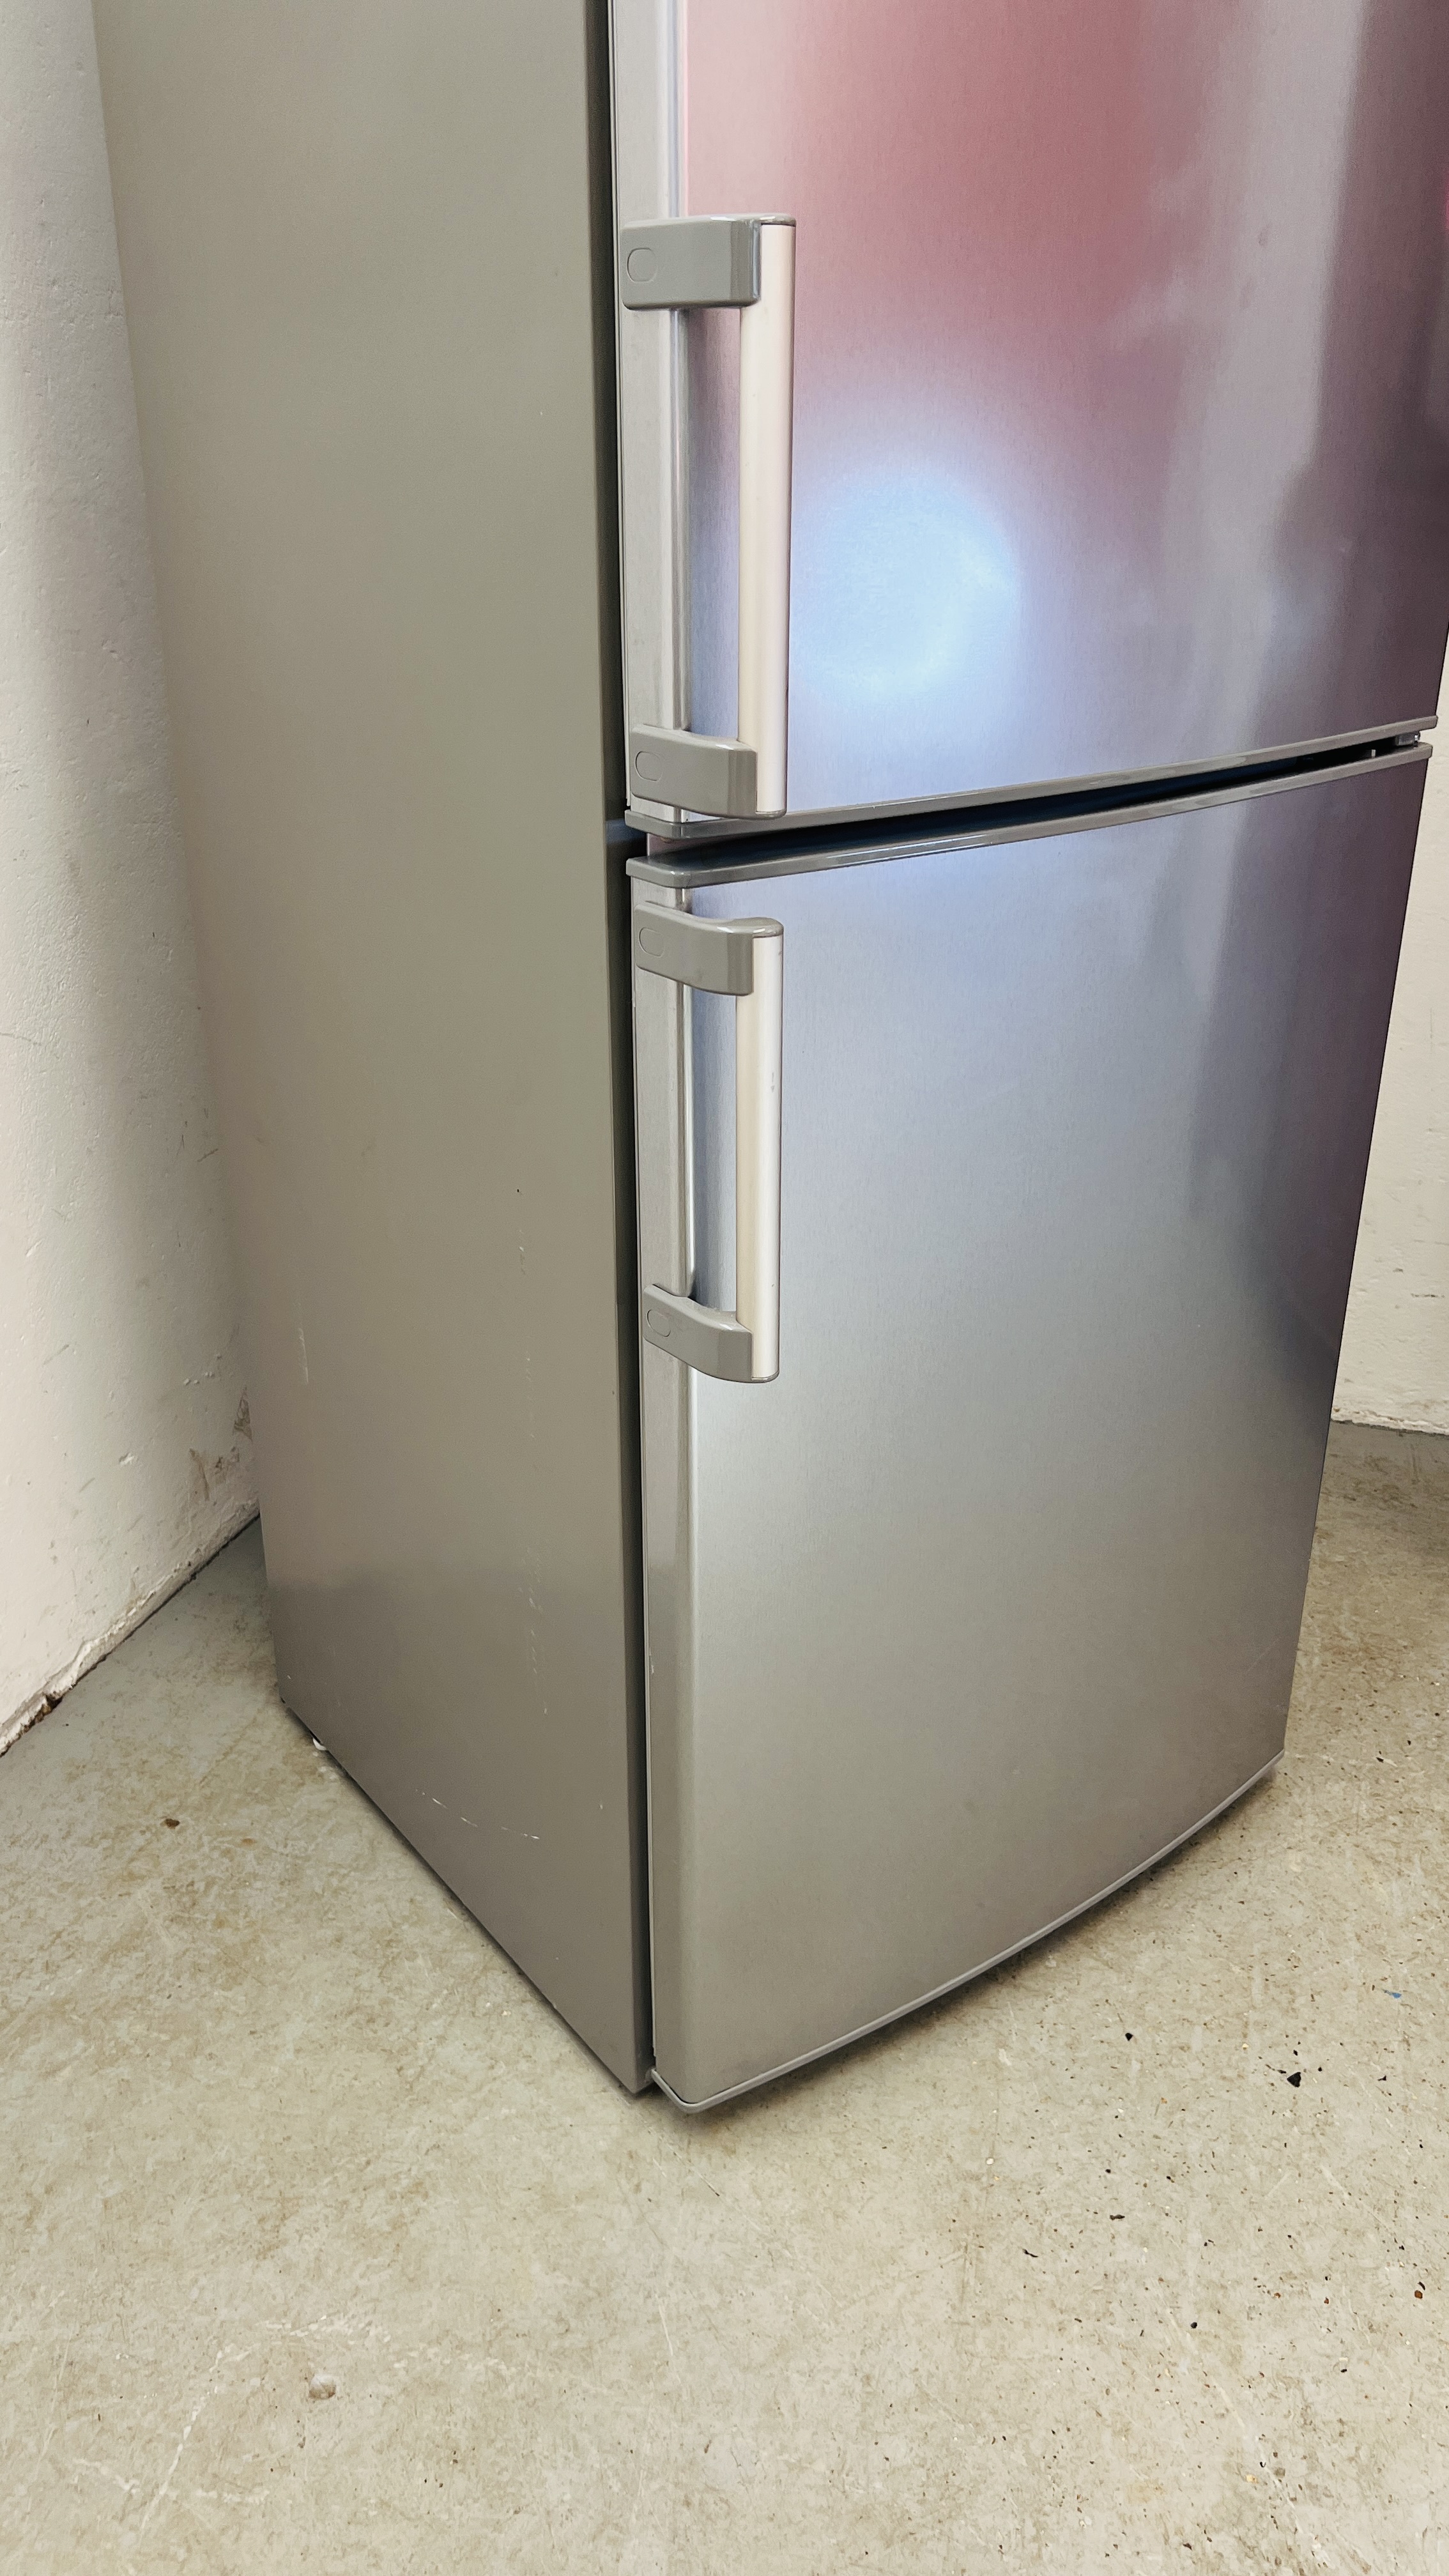 WHIRLPOOL SILVER FINISH A+++ CLASS NO FROST FRIDGE FREEZER WITH 6TH SENSE FRESH CONTROL - SOLD AS - Image 6 of 13